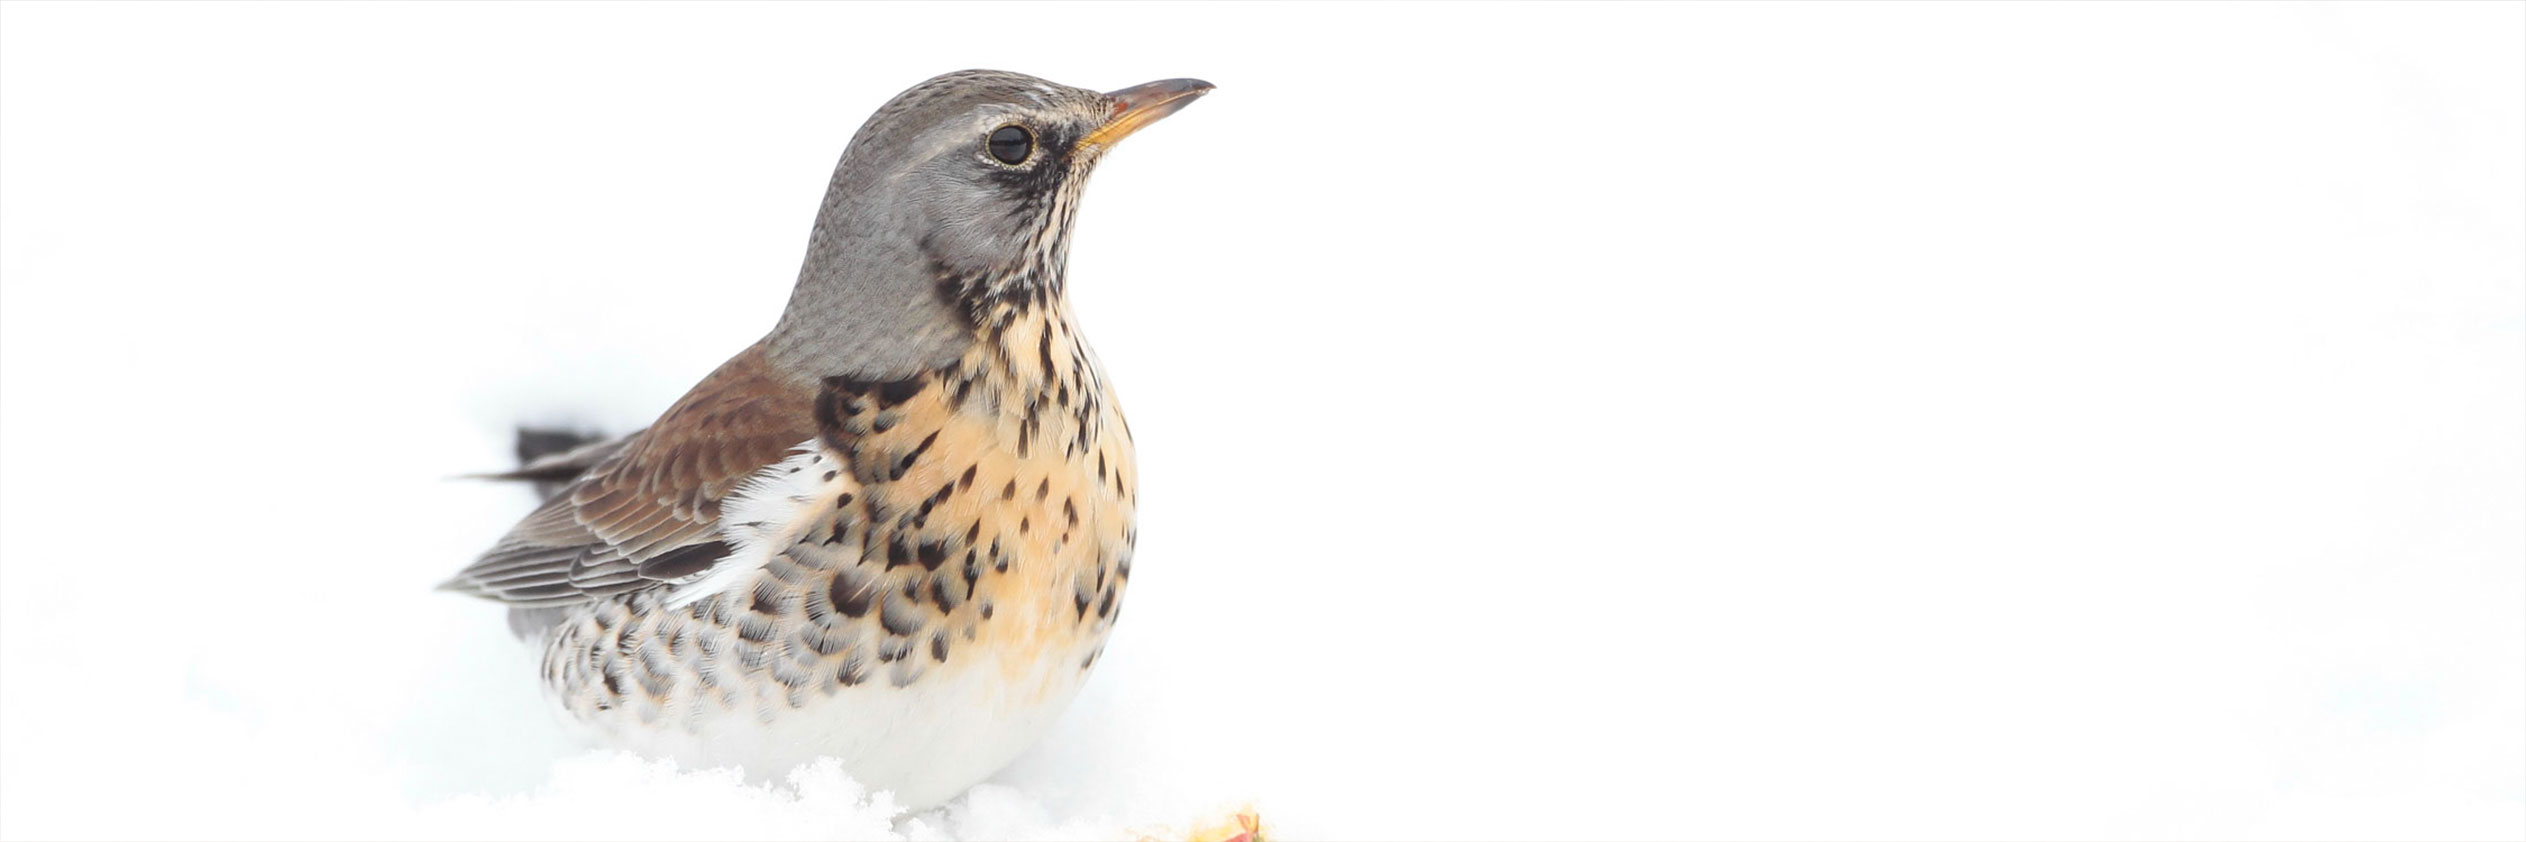 Great views of winter thrushes, a wildlife photographers guide